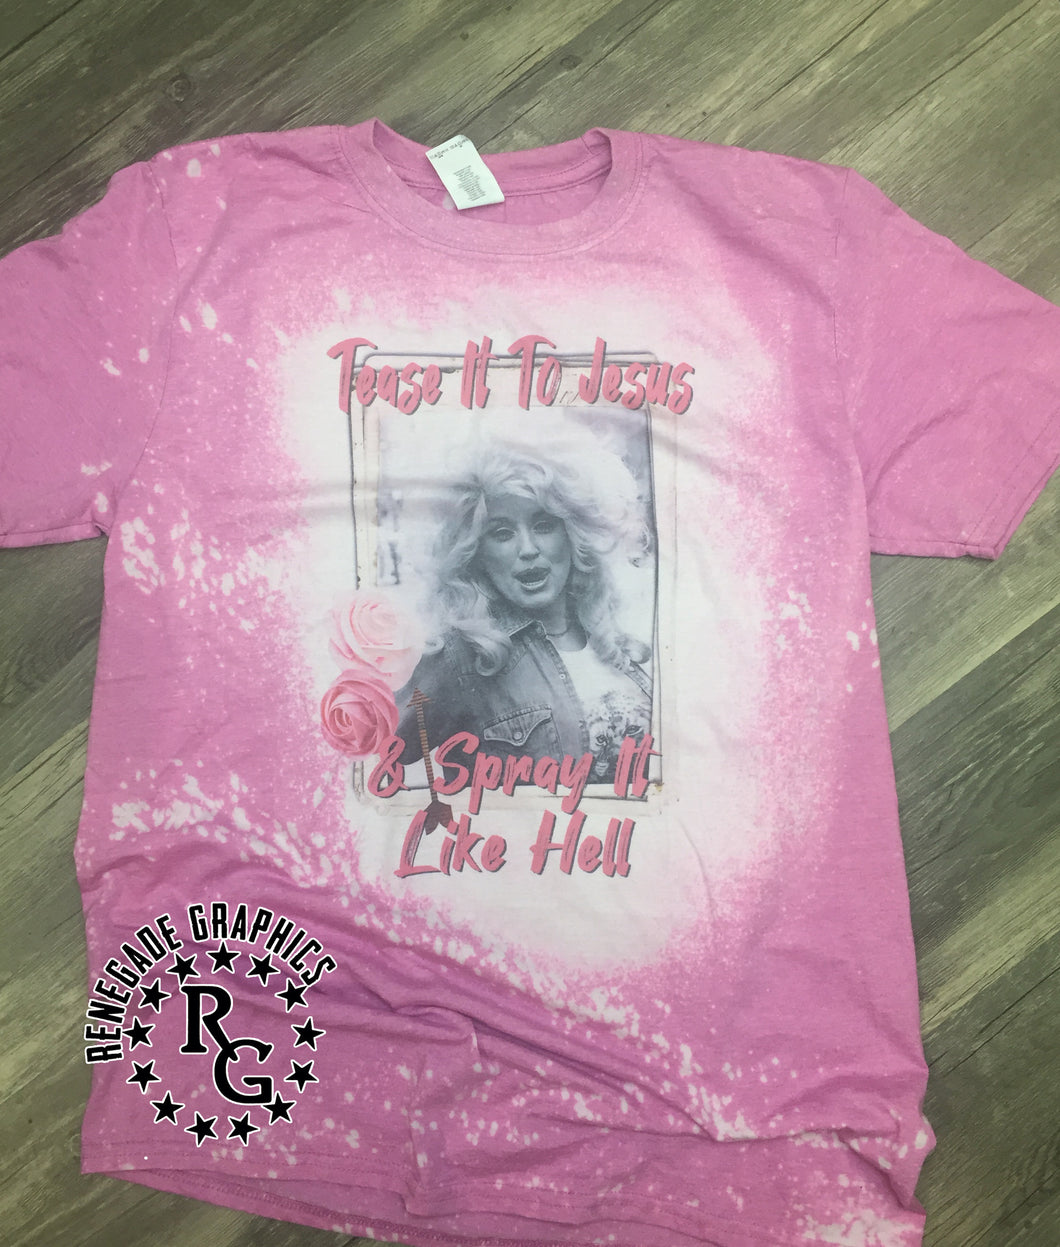 Tease It To Jesus | Country Music | Diva | Vintage | Bleached Shirt